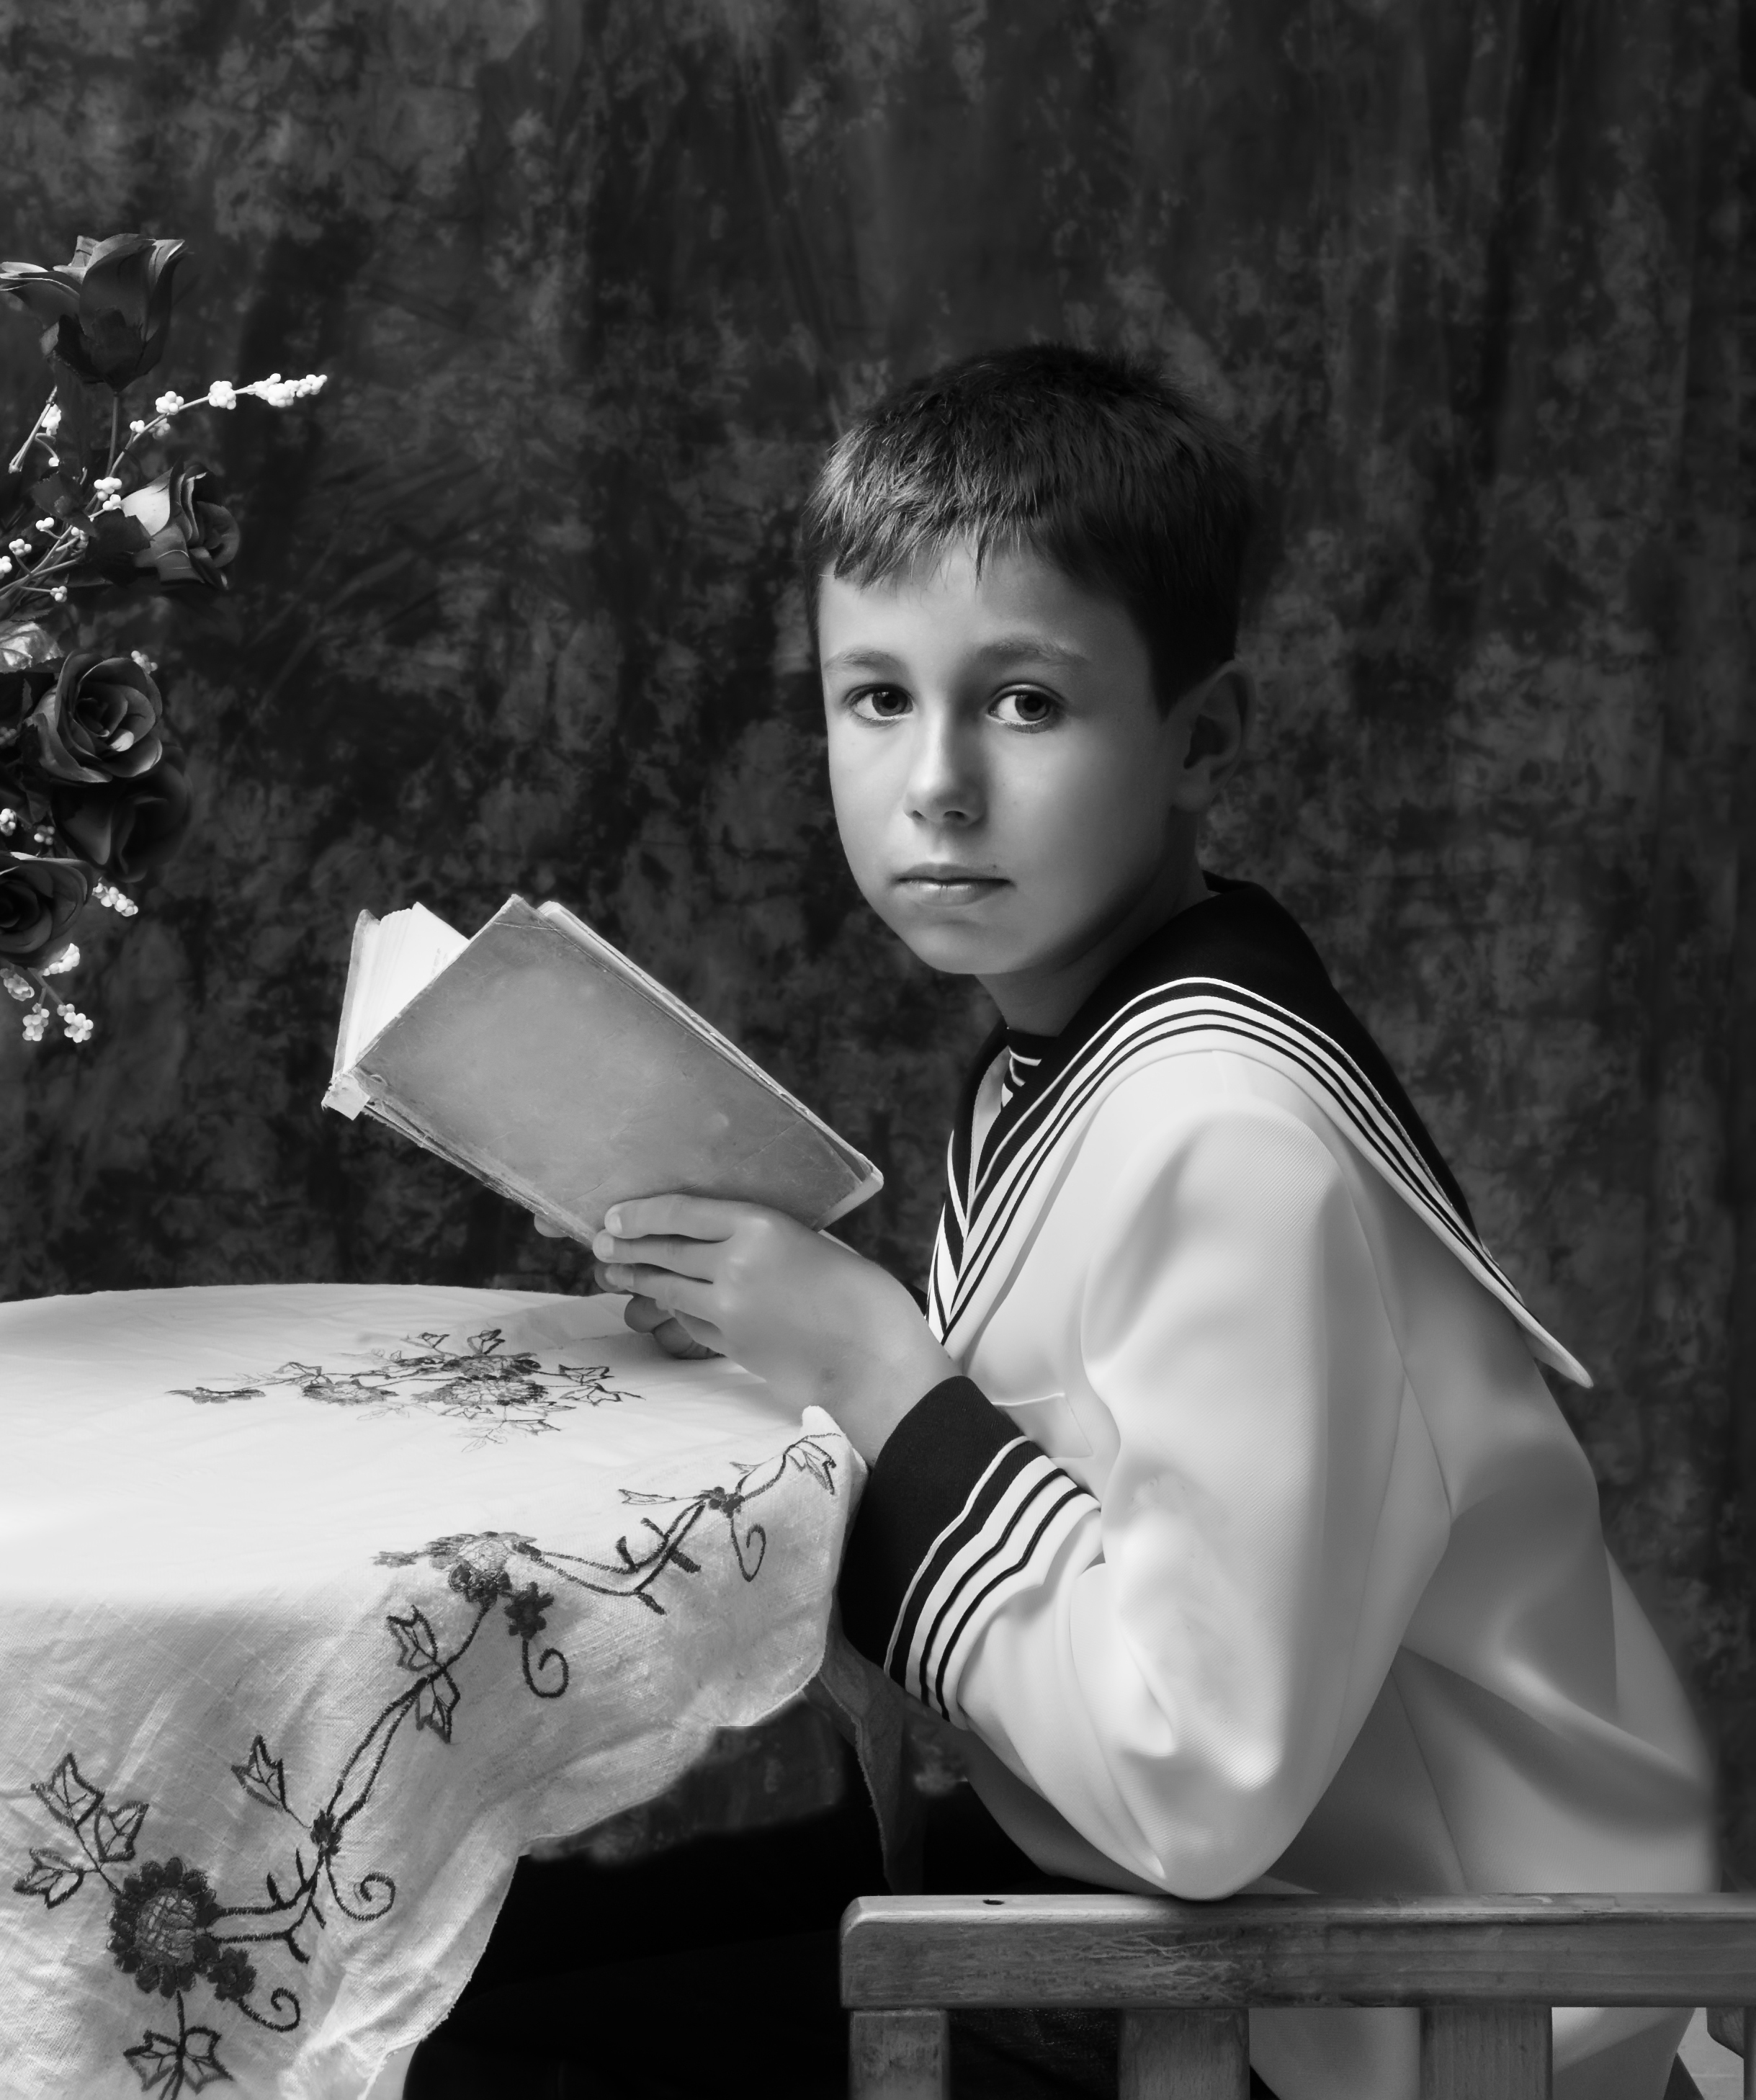 A boy sitting at a table holding a book | Source: Shutterstock